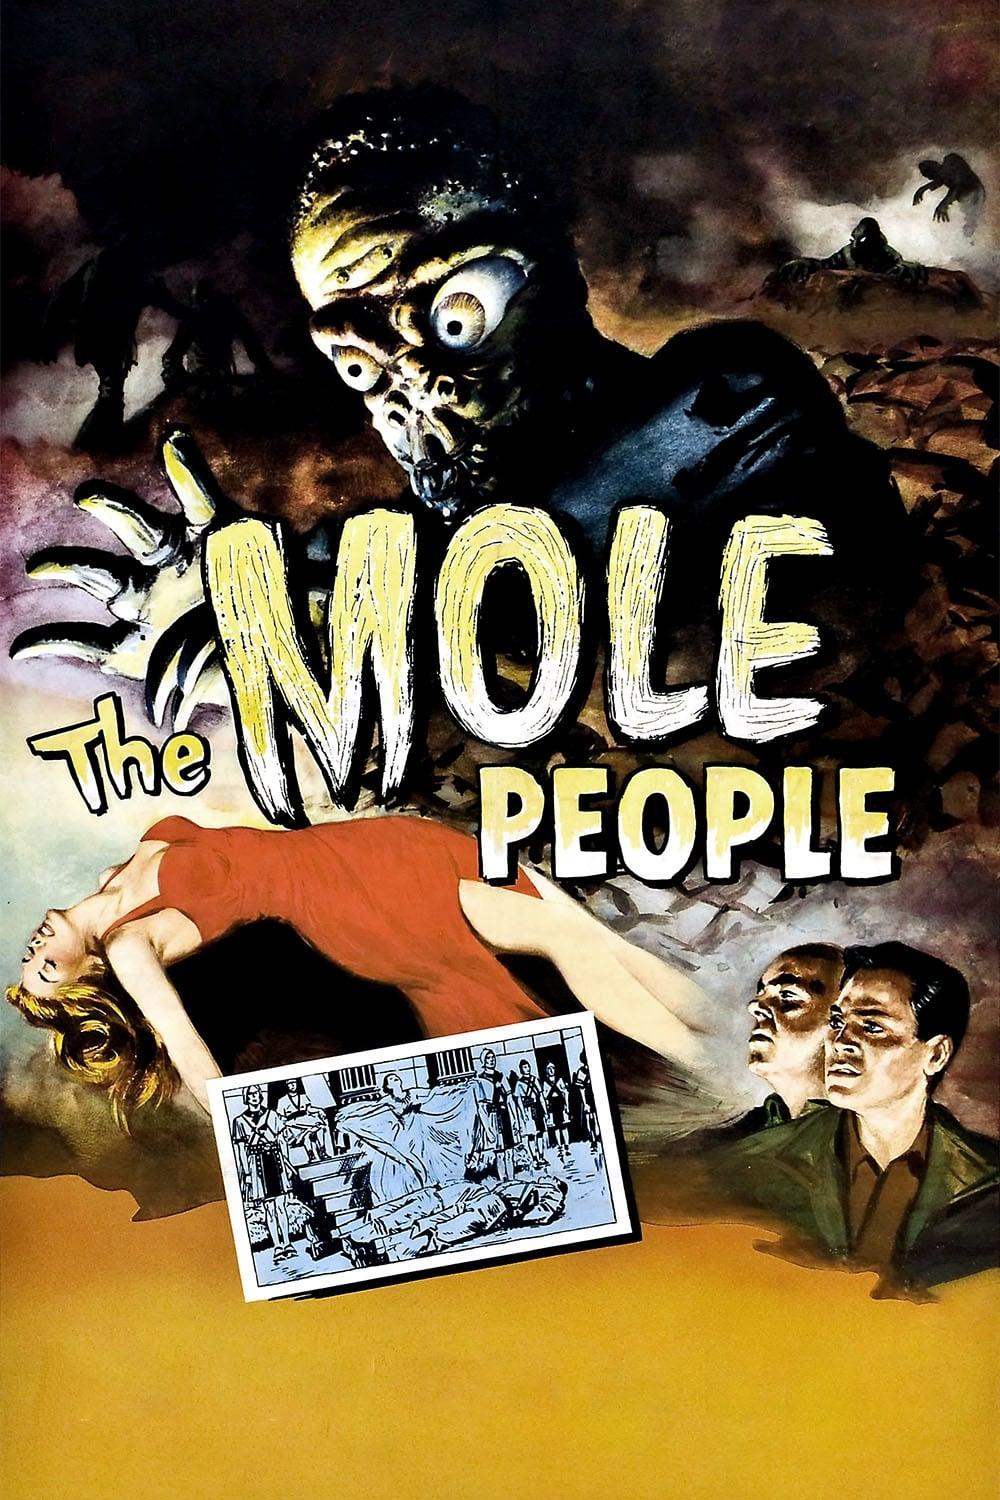 The Mole People poster